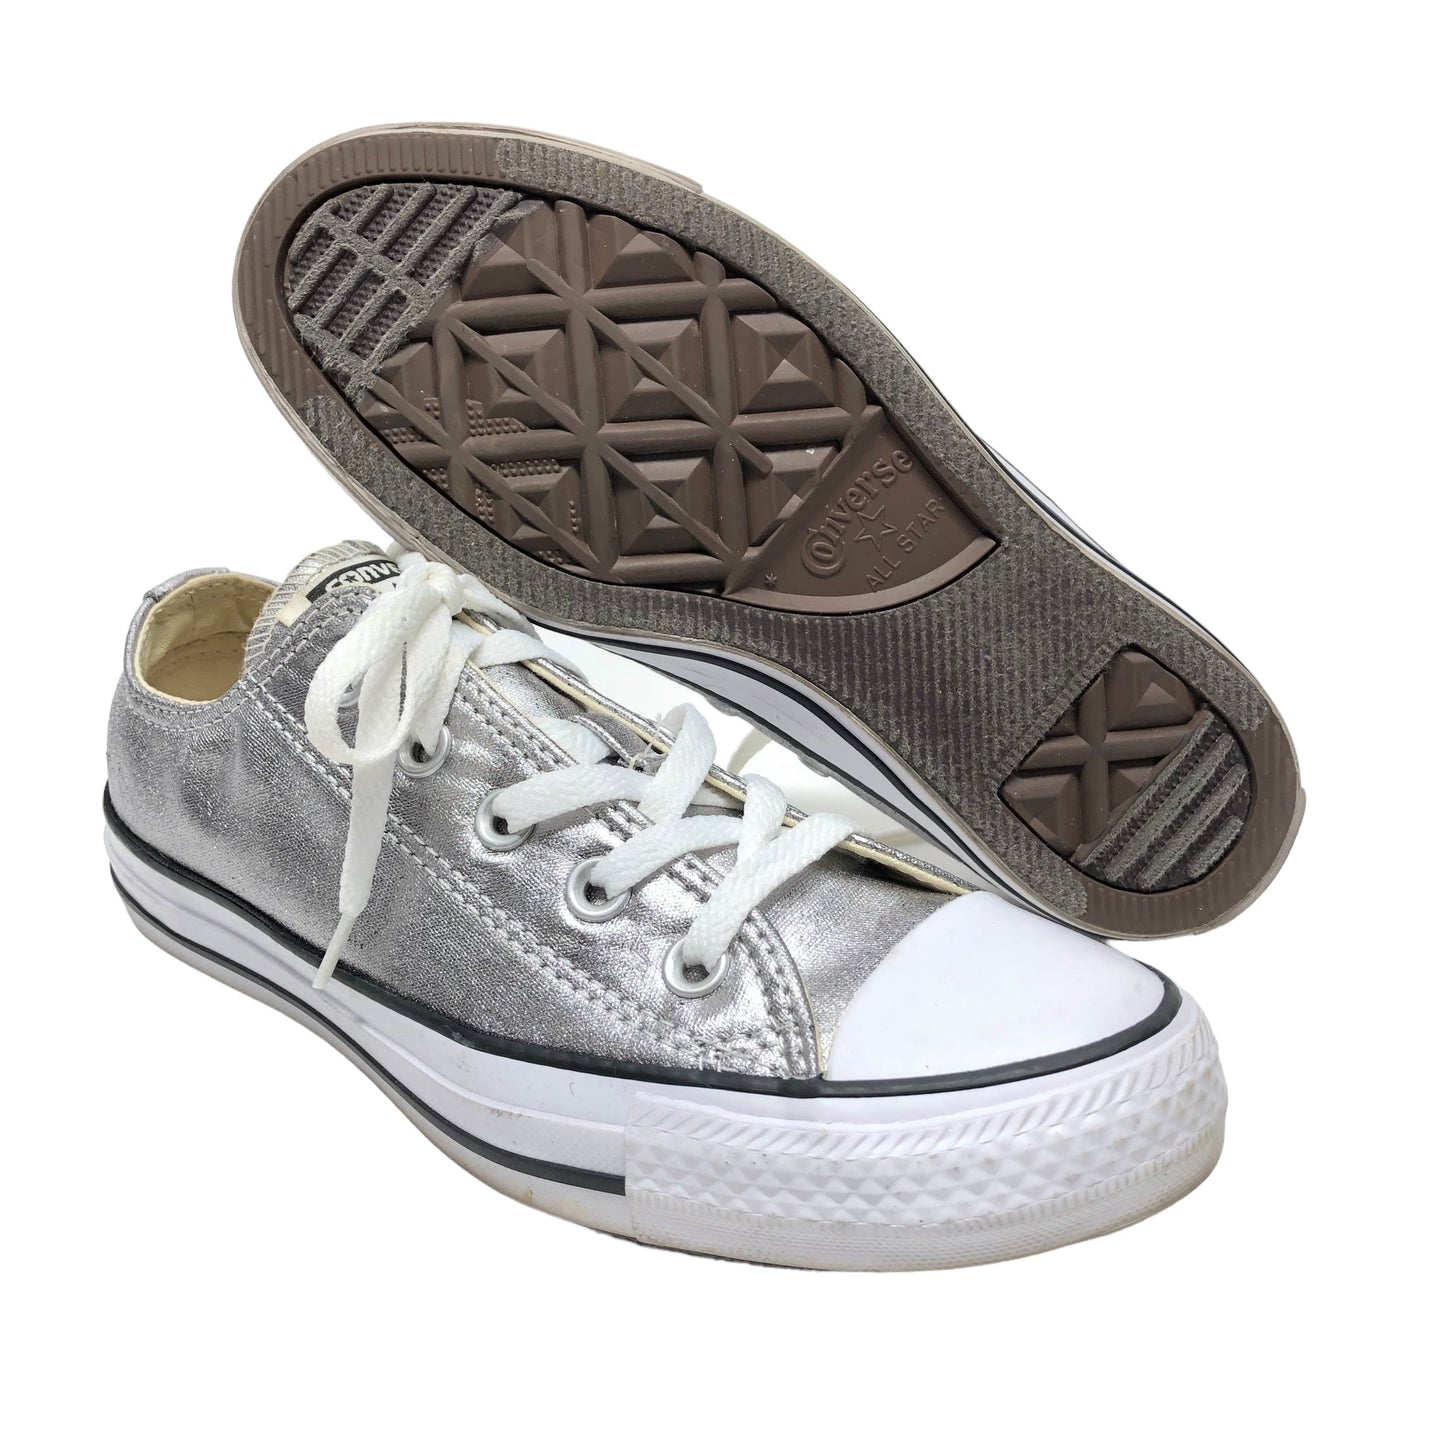 Silver Shoes Sneakers Converse, Size 6